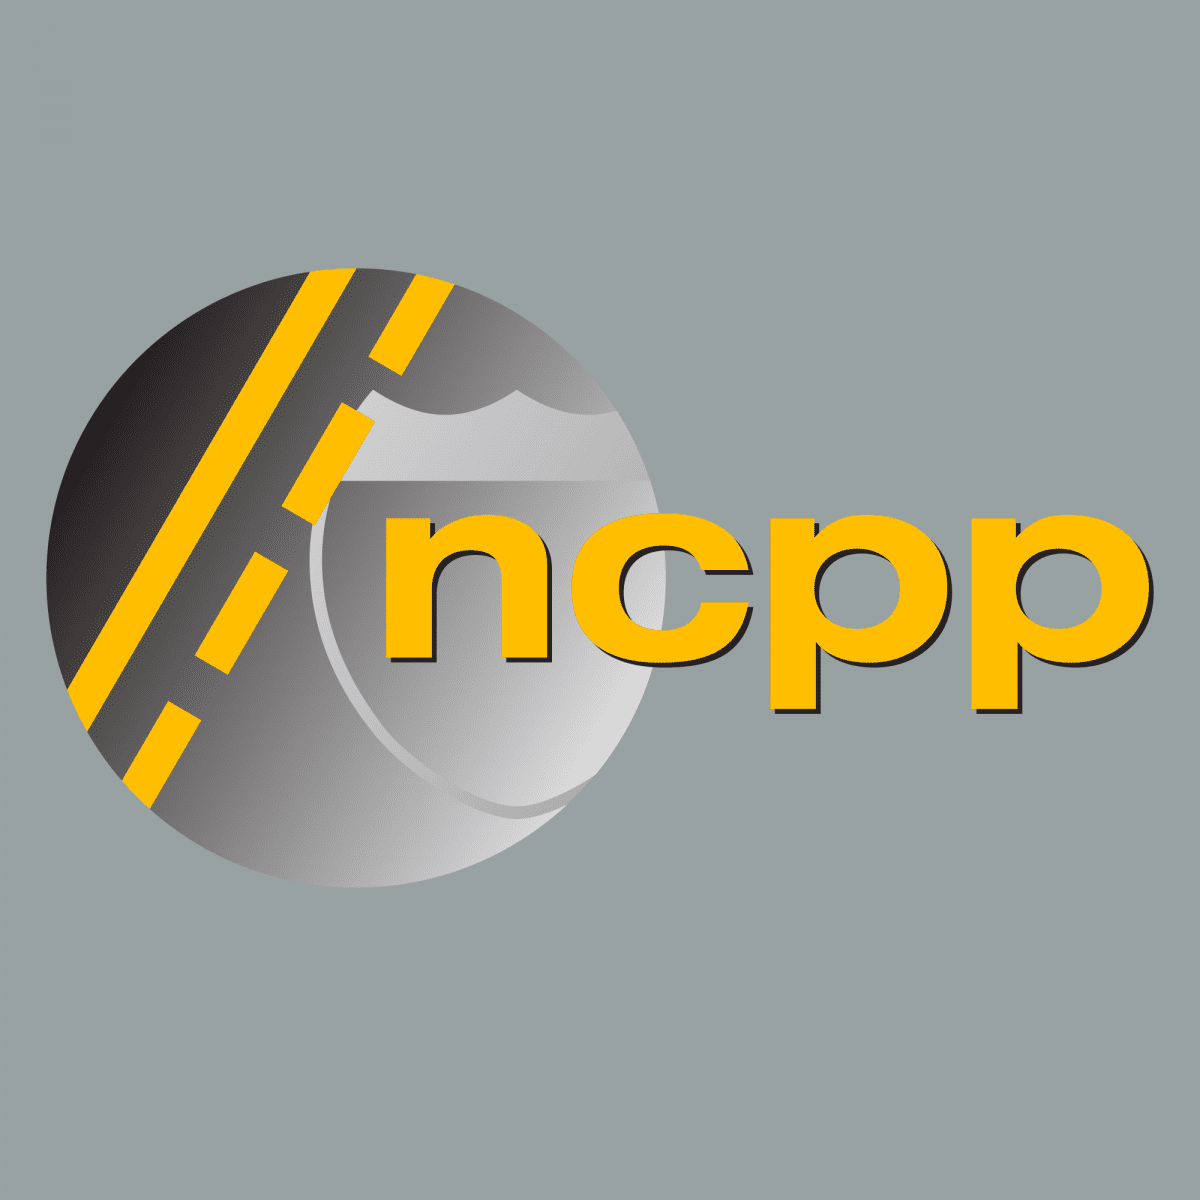 NPPPC (National Pavement Preservation Partnership Conference) 2023